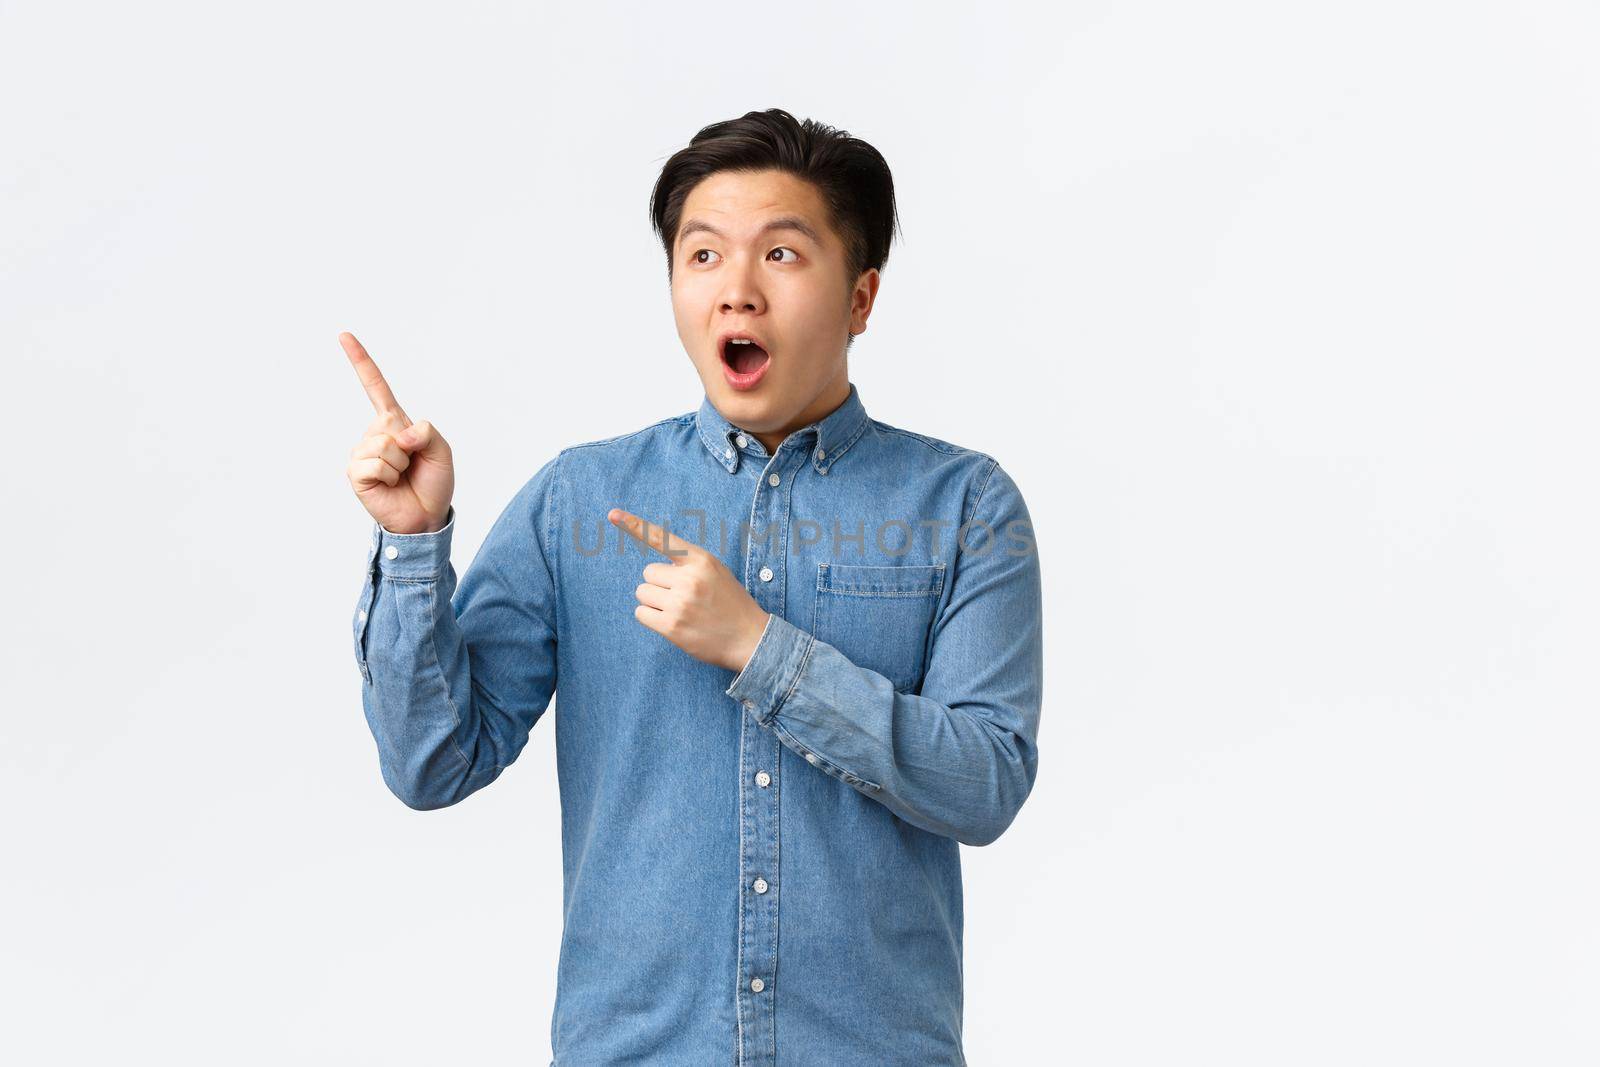 Impressed and astounded young asian man react to fantastic news, open mouth fascinated, pointing and looking upper left corner amazing advertisement banner, standing white background.